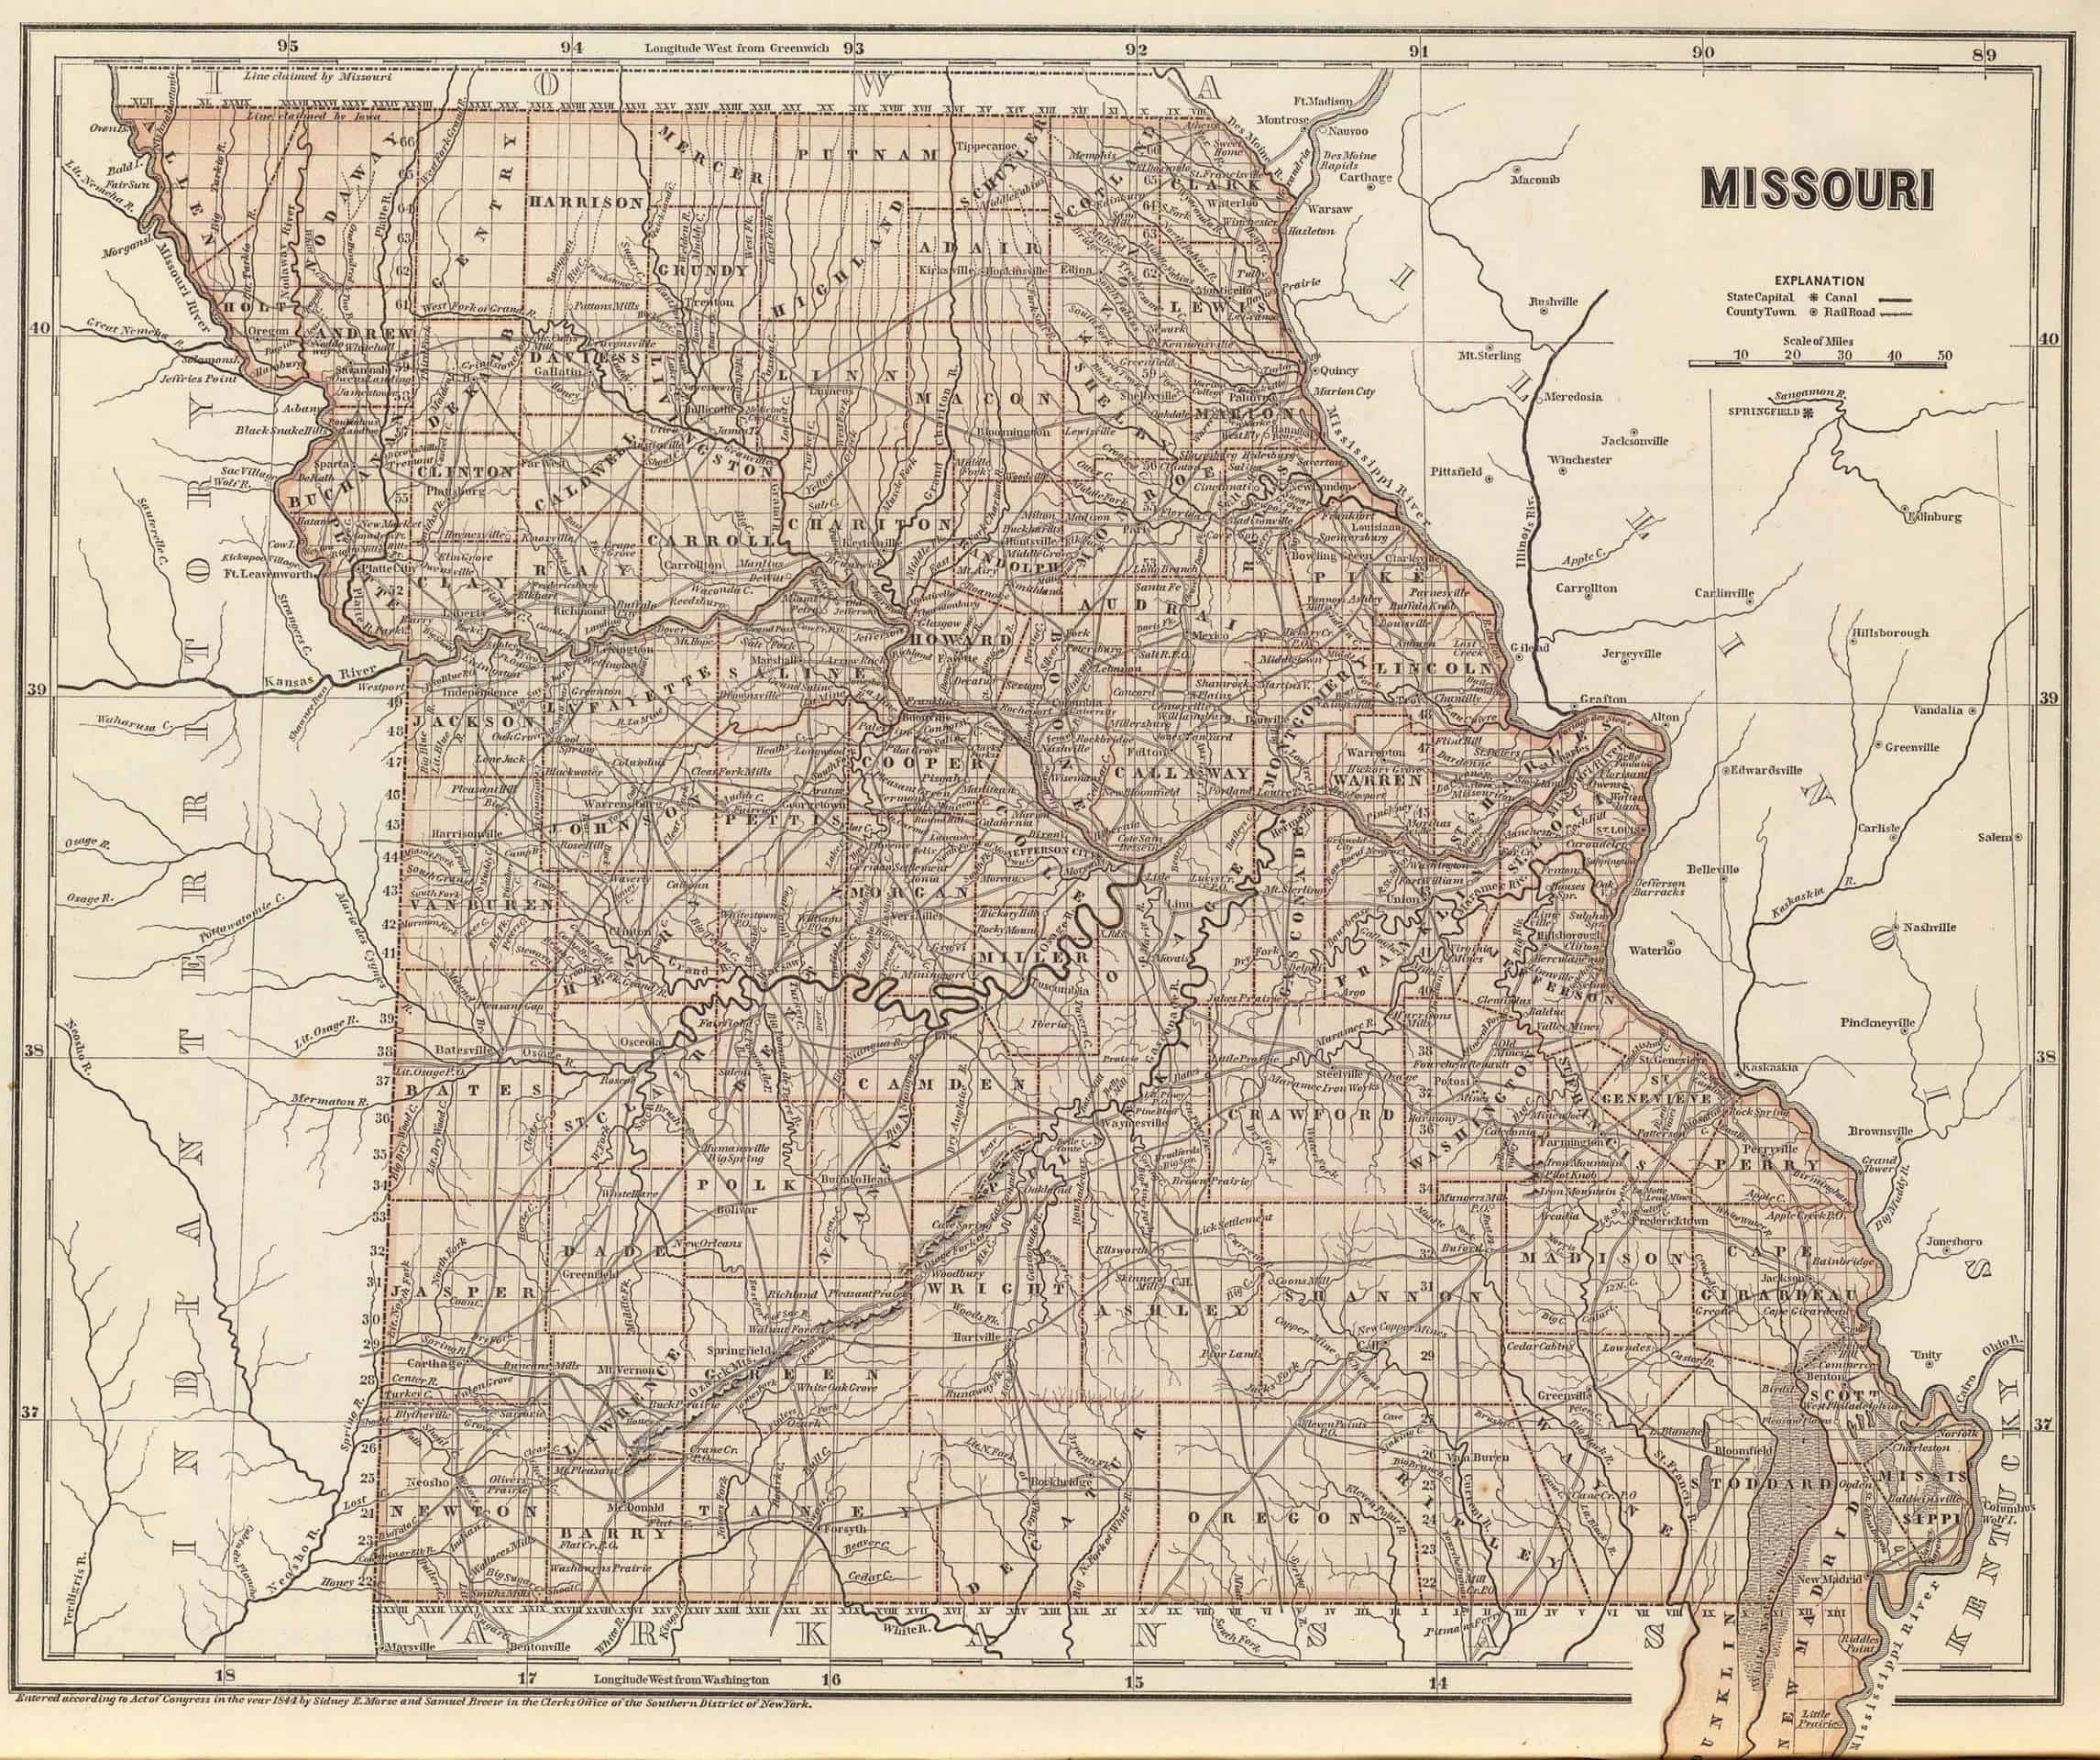 Old Historical City, County And State Maps Of Missouri - Texas County Missouri Plat Map